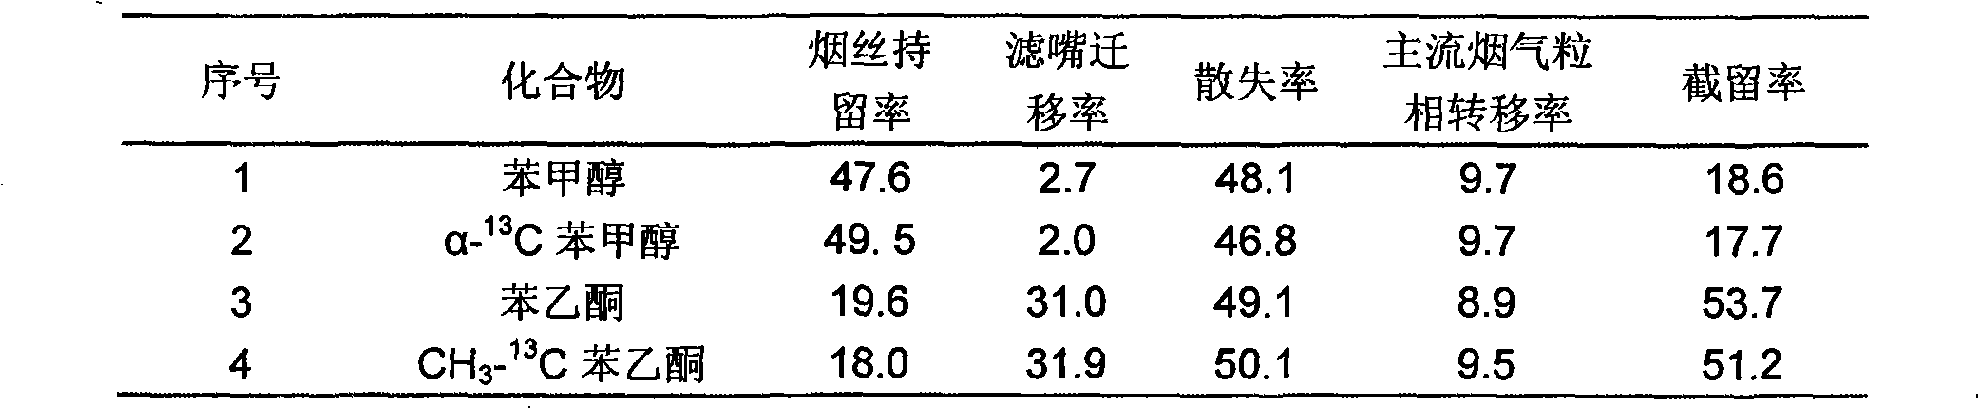 Method for measuring transfer action index of 13C marked perfume monomer and normal perfume monomer in cigarette